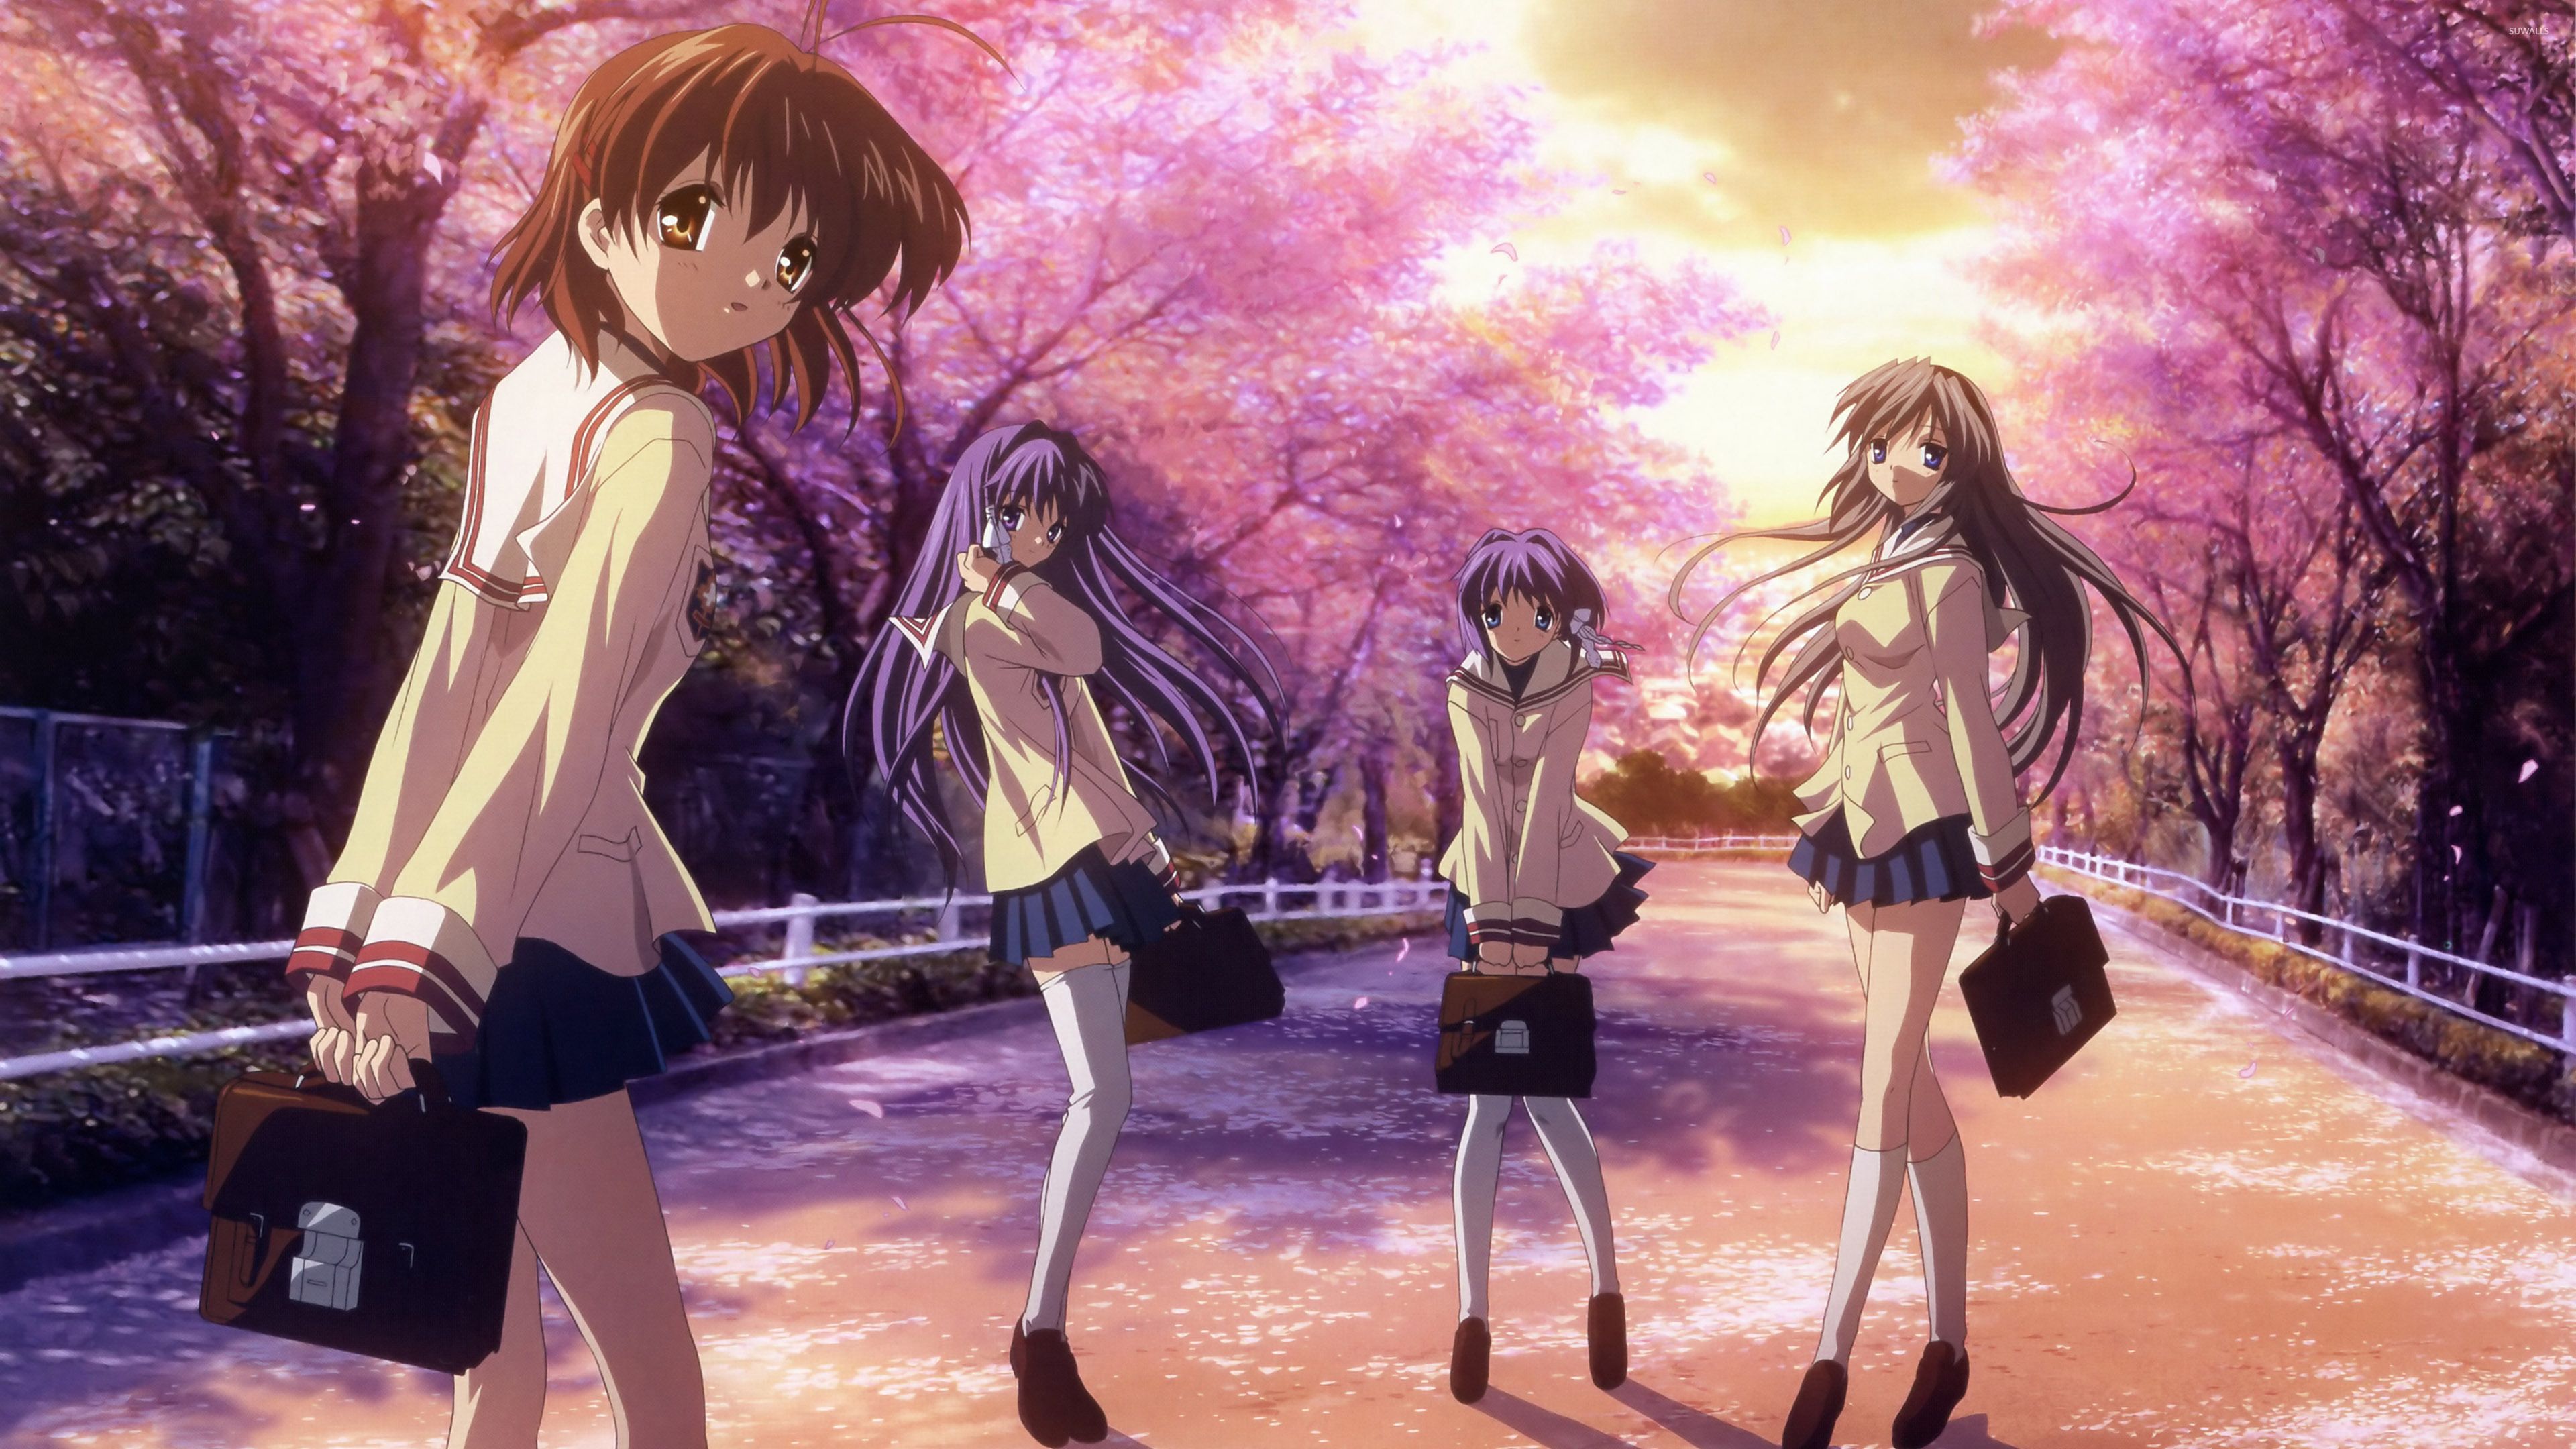 Download Top Anime Clannad Main Characters Wallpaper